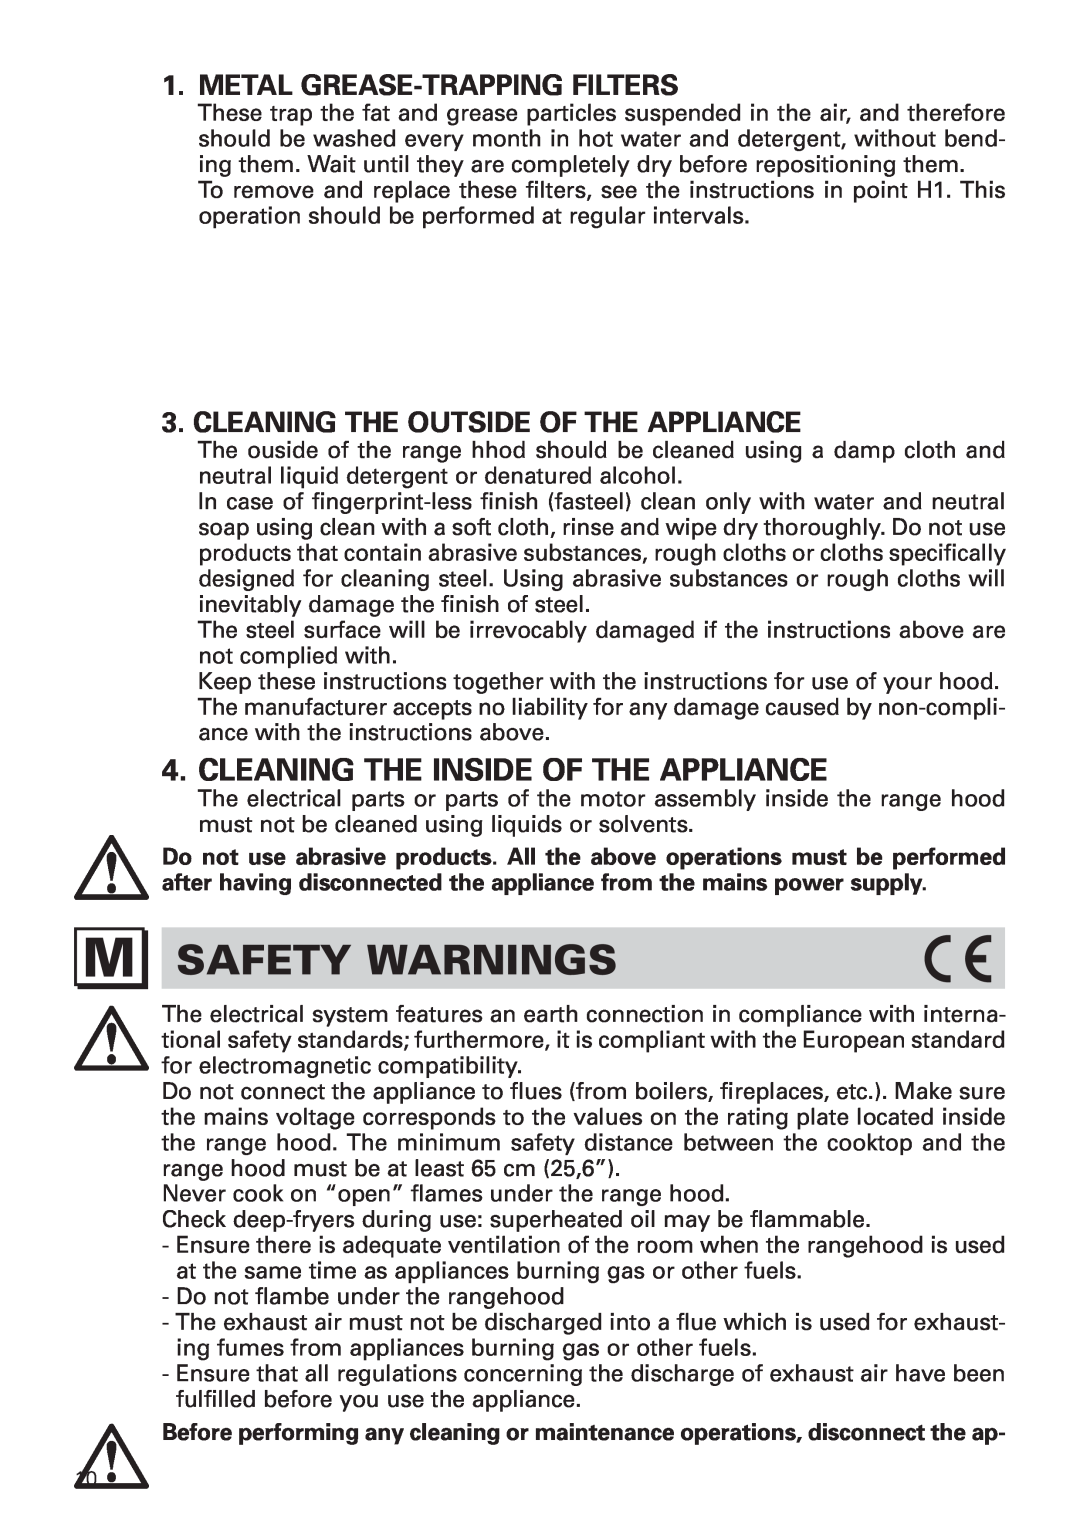 Bertazzoni KIN 30 PER X manual M Safety Warnings, Cleaning The Inside Of The Appliance, Metal Grease-Trappingfilters 